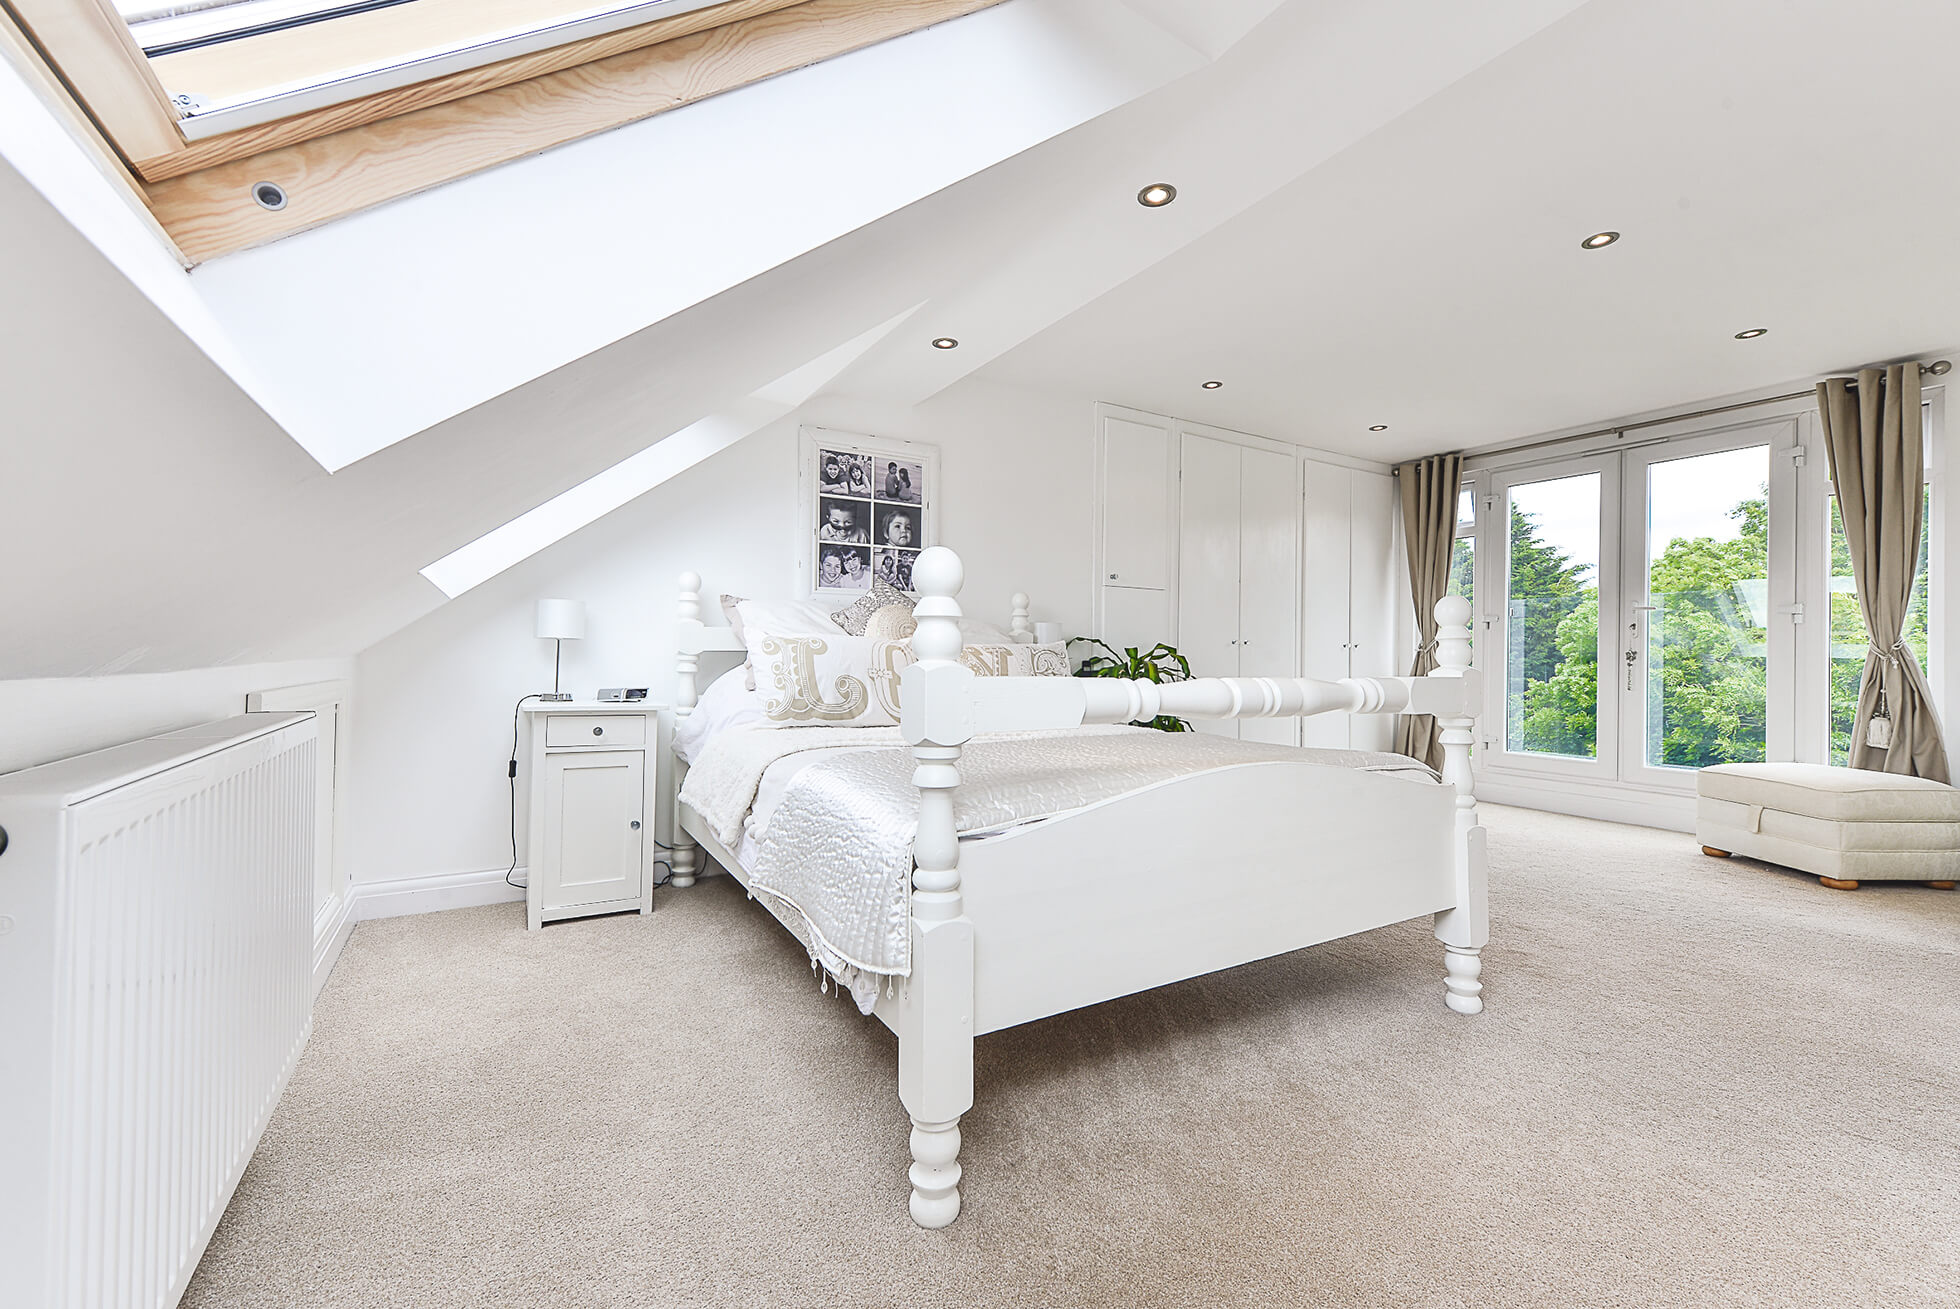 Do you have a question about converting your Loft in Belsize? Here are the most popular questions asked by our clients.